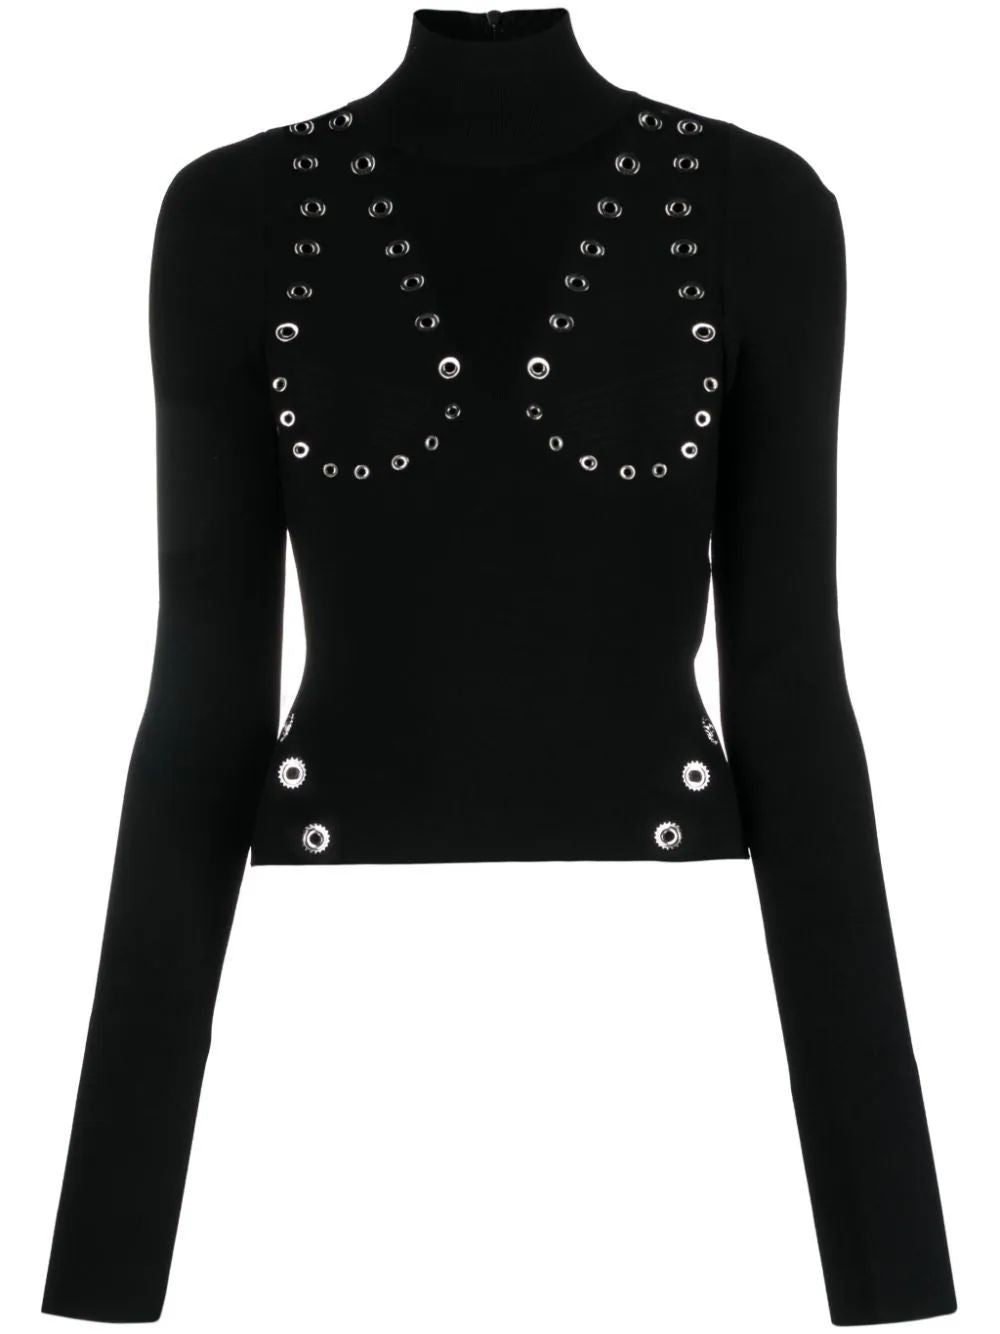 OFF-WHITE Eyelet-Embellished High Neck Knit Top in Black for Women - FW23 Collection